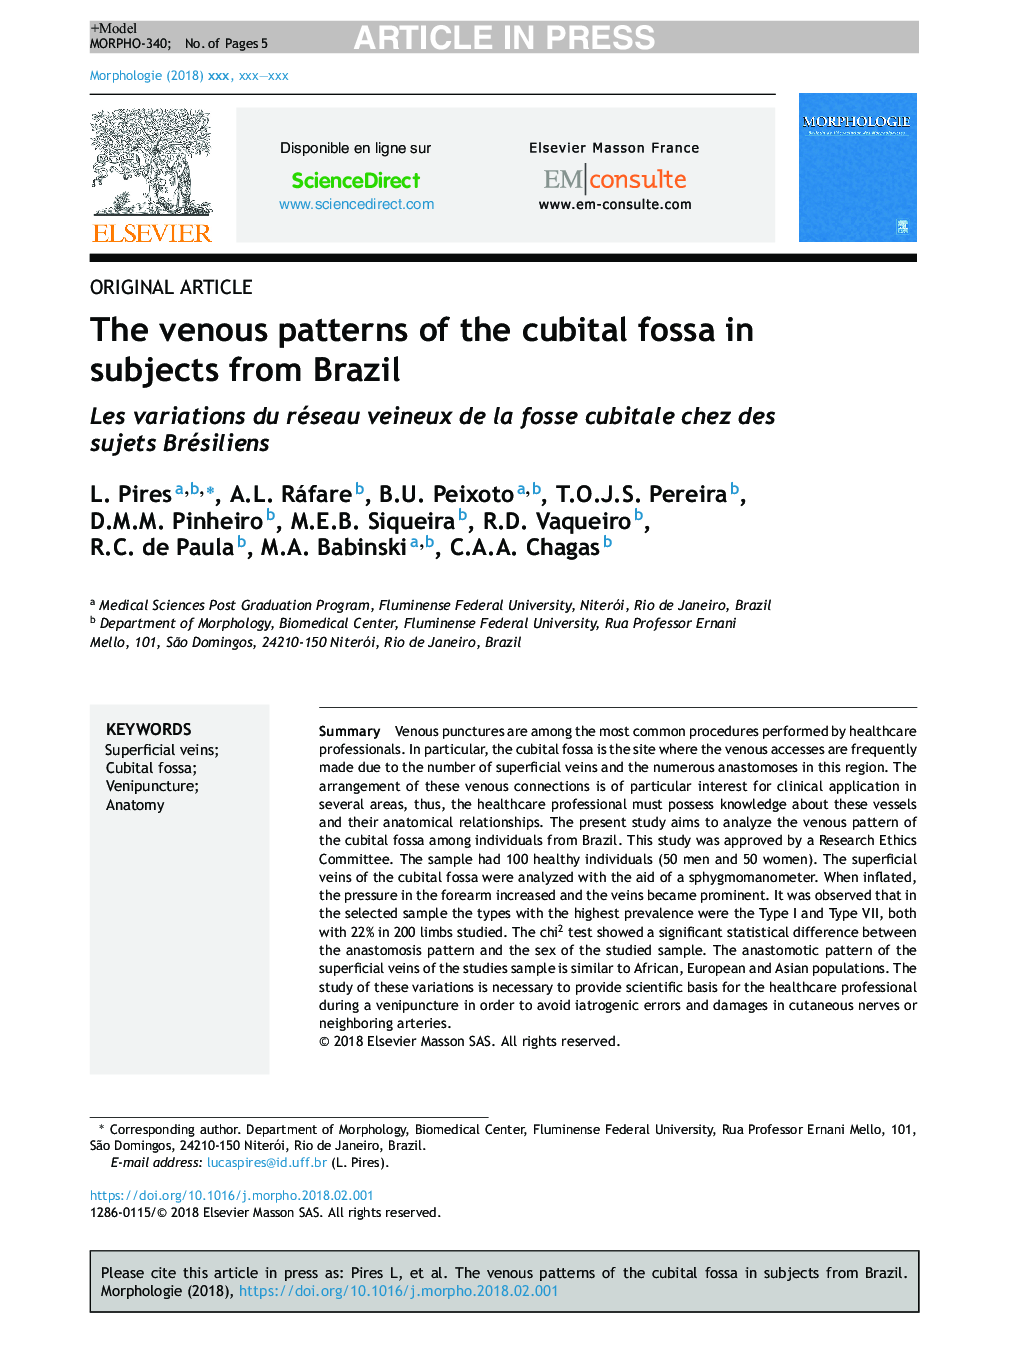 The venous patterns of the cubital fossa in subjects from Brazil